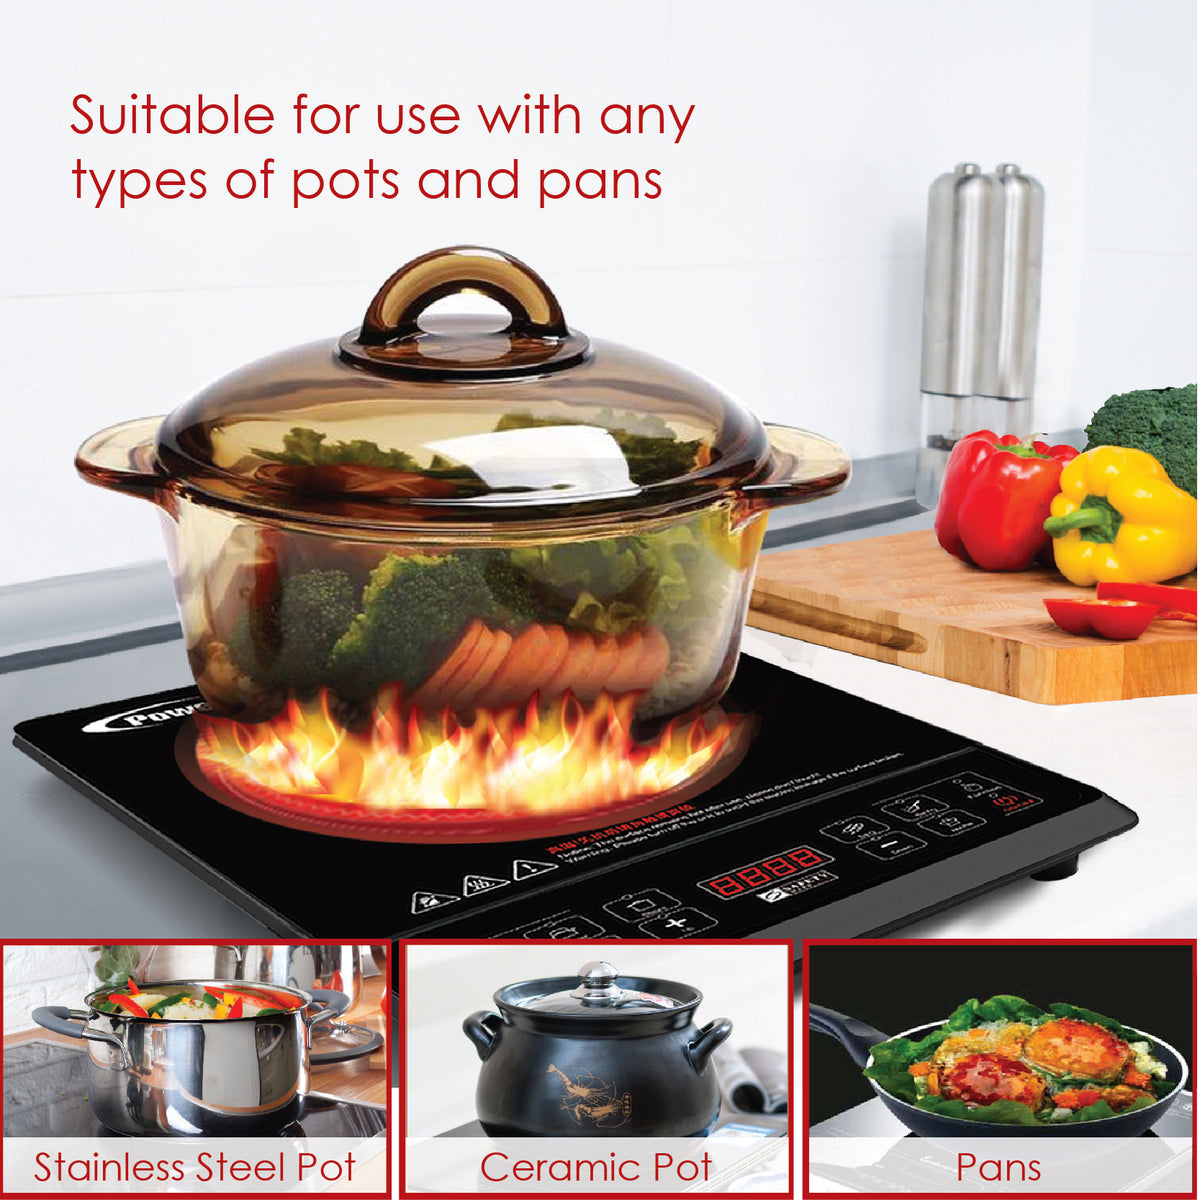 Ceramic Cooker (Any Pot) 2000 Watts (PPIC832) - PowerPacSG